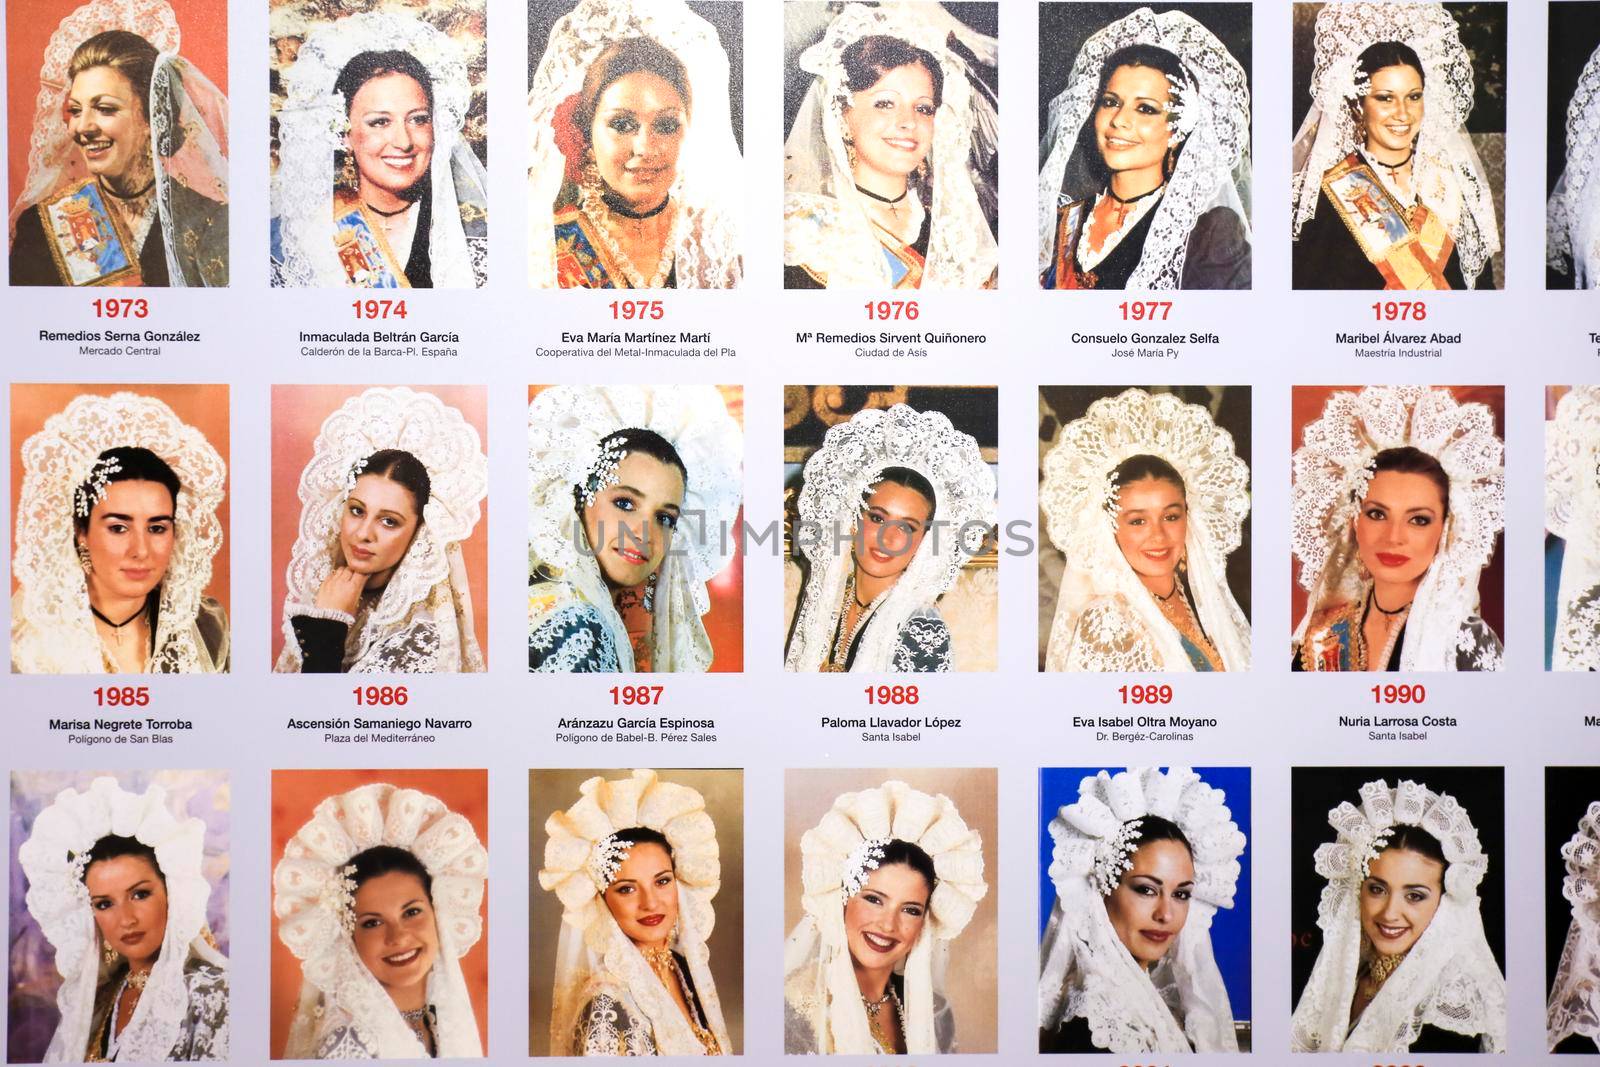 Alicante, Spain- May 12, 2022: Vintage pictures of Belleas del Foc women in traditional costumes exhibited in The Hogueras Museum of Alicante